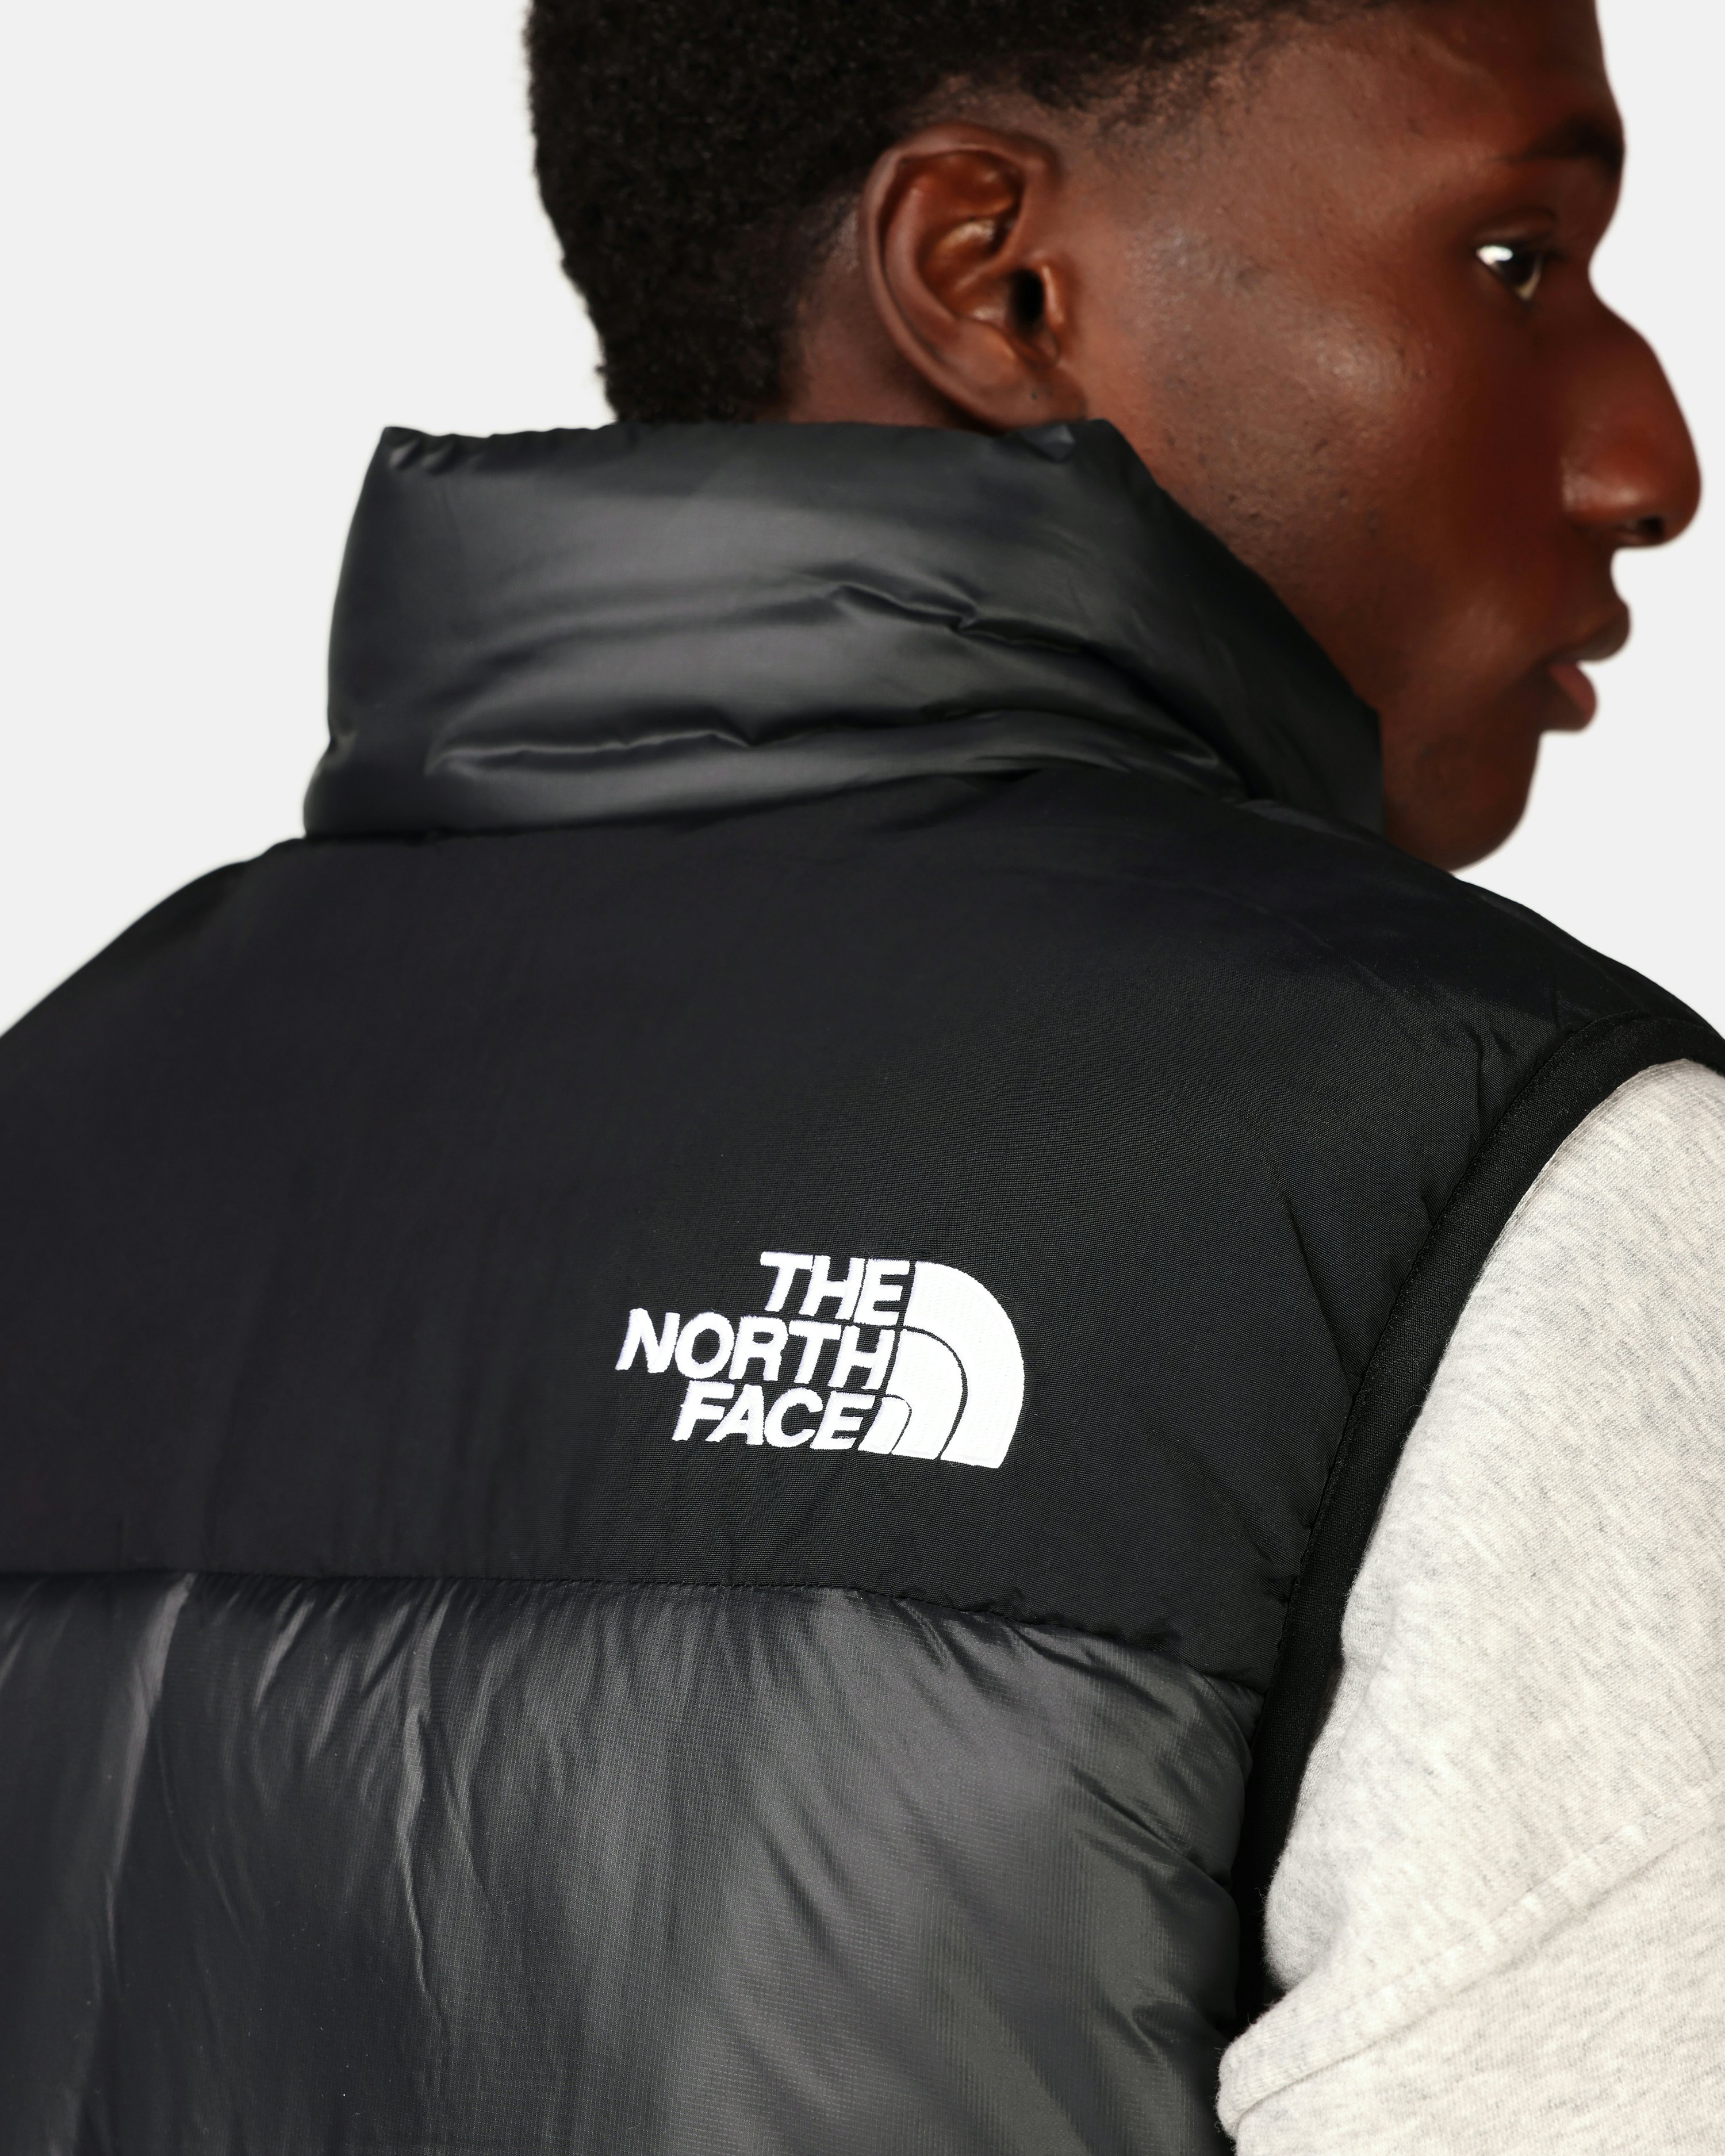 The North Face HIMALAYAN INSULATED VEST Black - tnf black